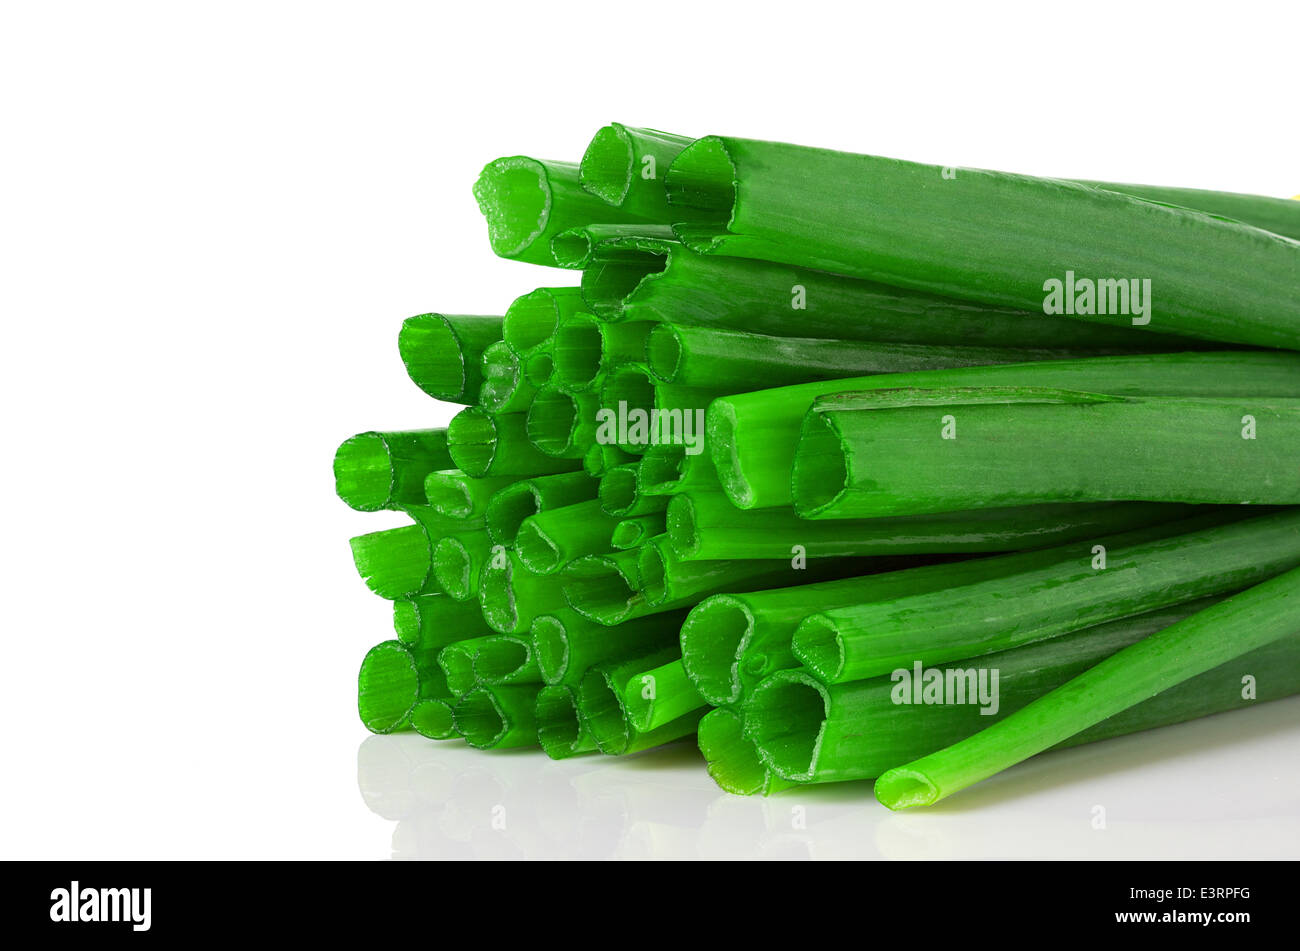 Fresh chives close up on white background Stock Photo